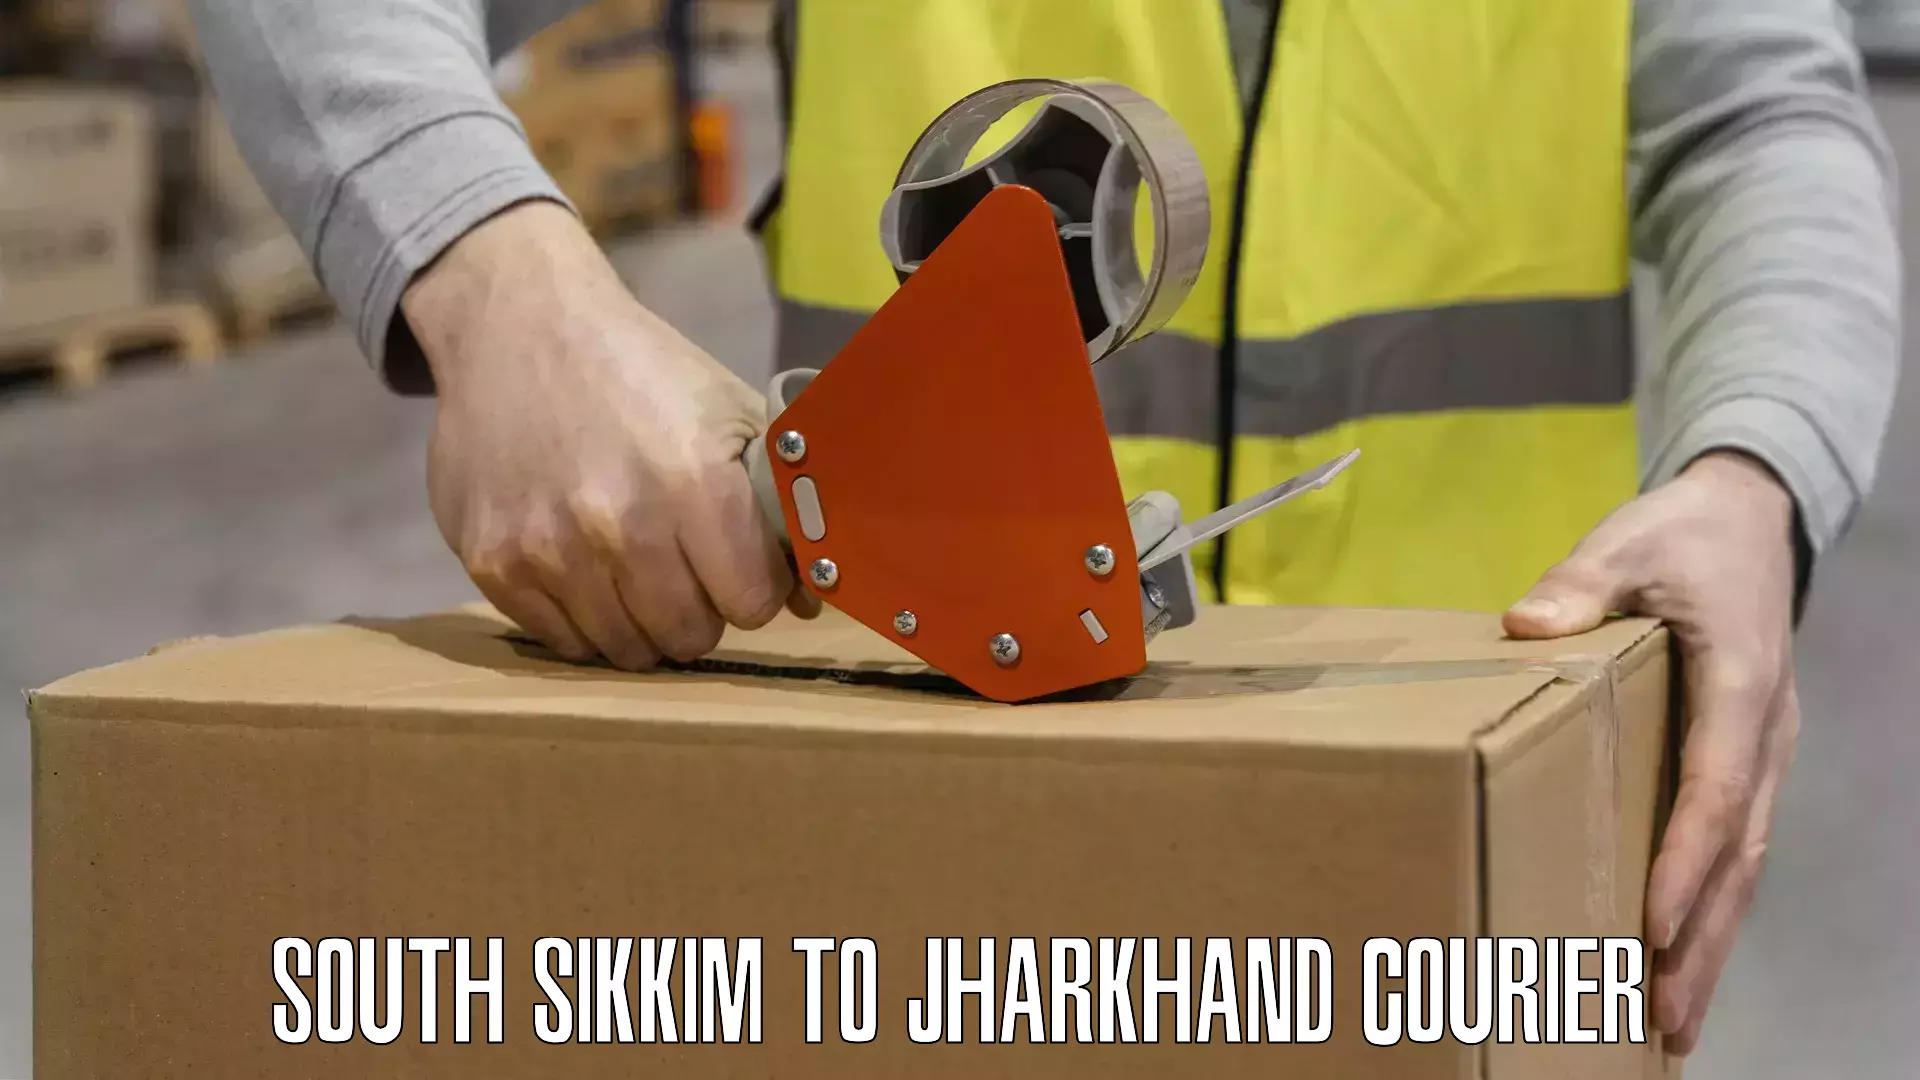 Courier service partnerships South Sikkim to Jharkhand